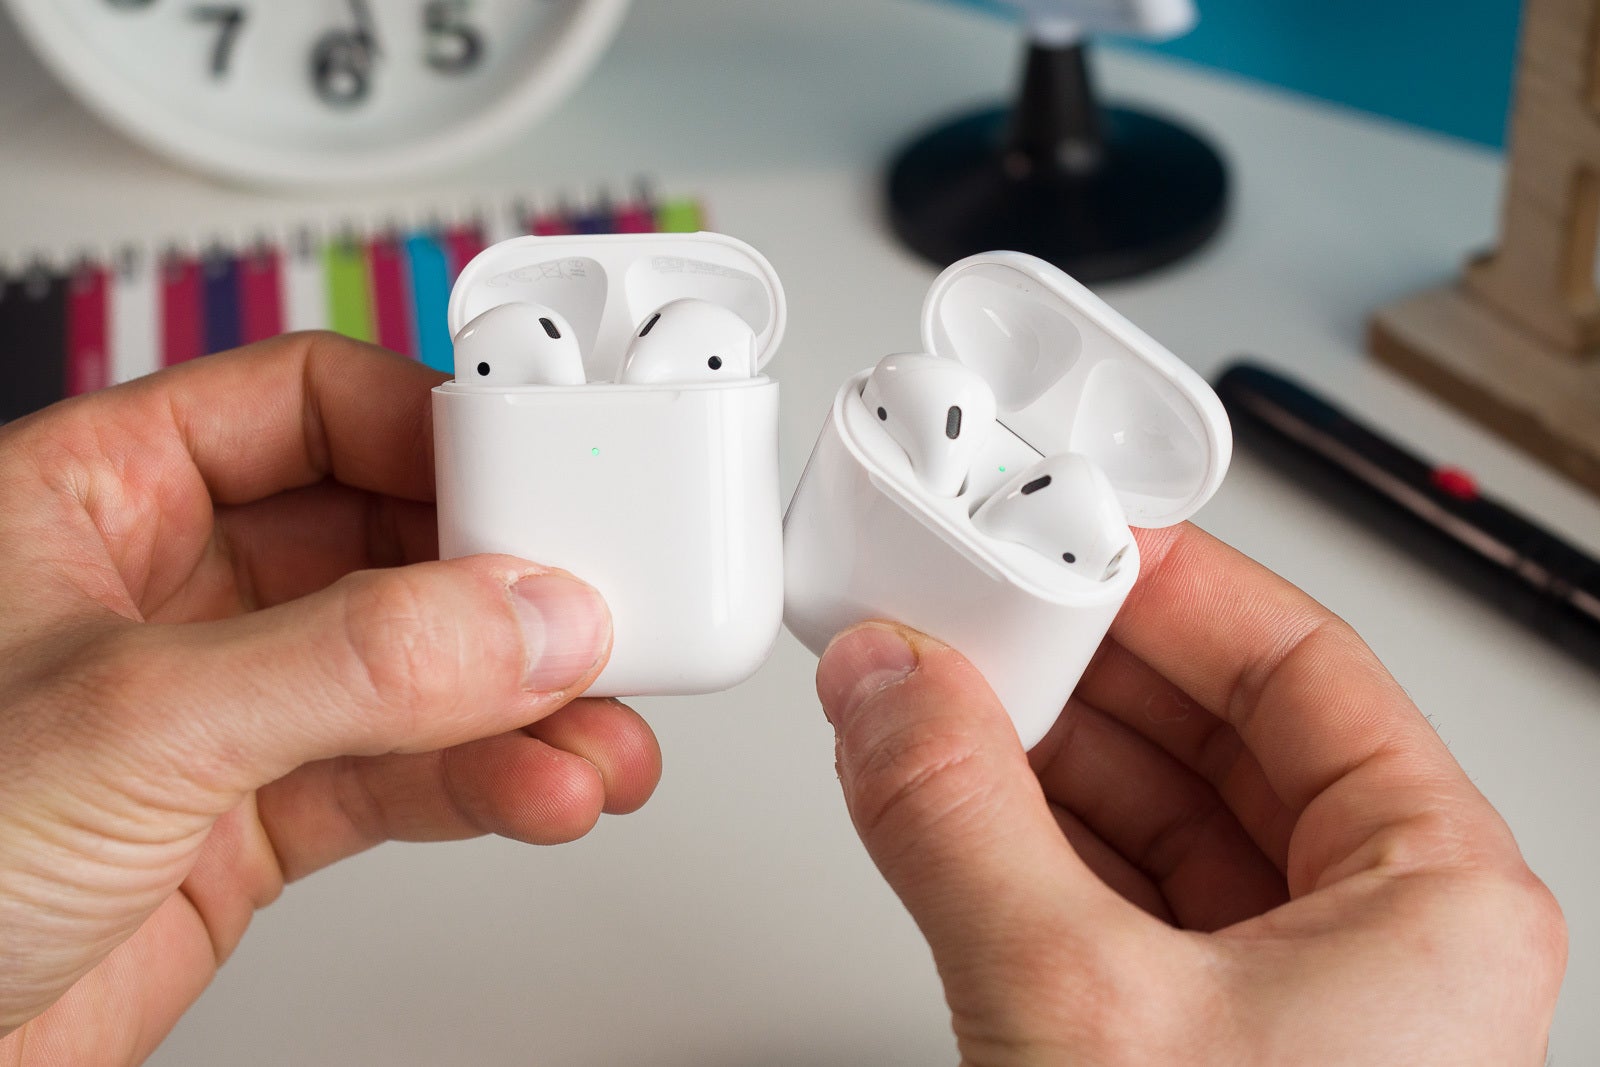 Listen to music through two sets of AirPods at the same time - The iPhone 11 could finally introduce upgraded Bluetooth capabilities